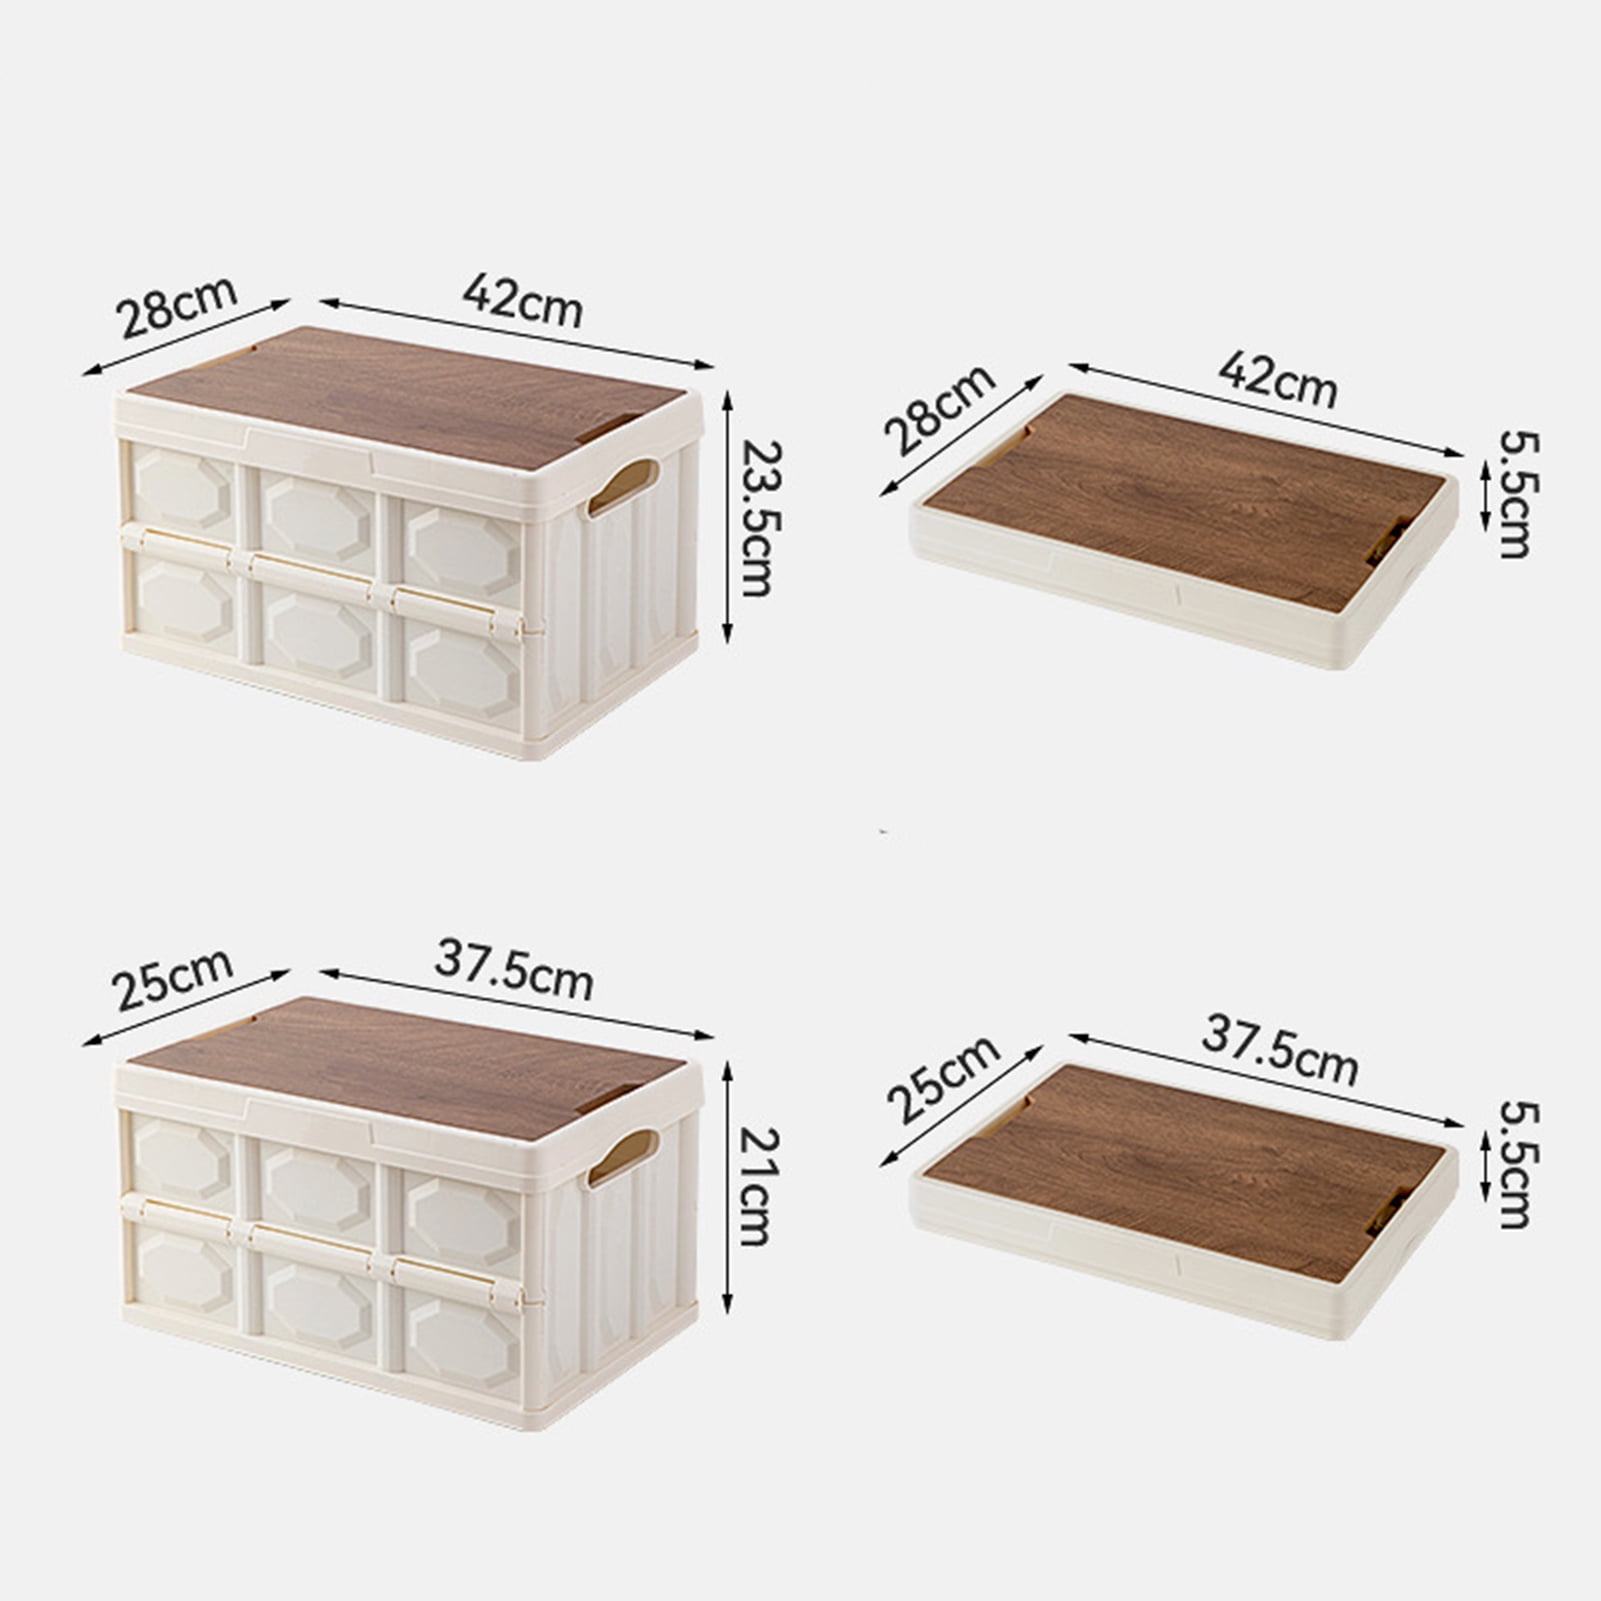 The foldable outdoor camping storage box has a large capacity of 48L, the  foldable storage box equipped with a wooden cover and rollers can be used